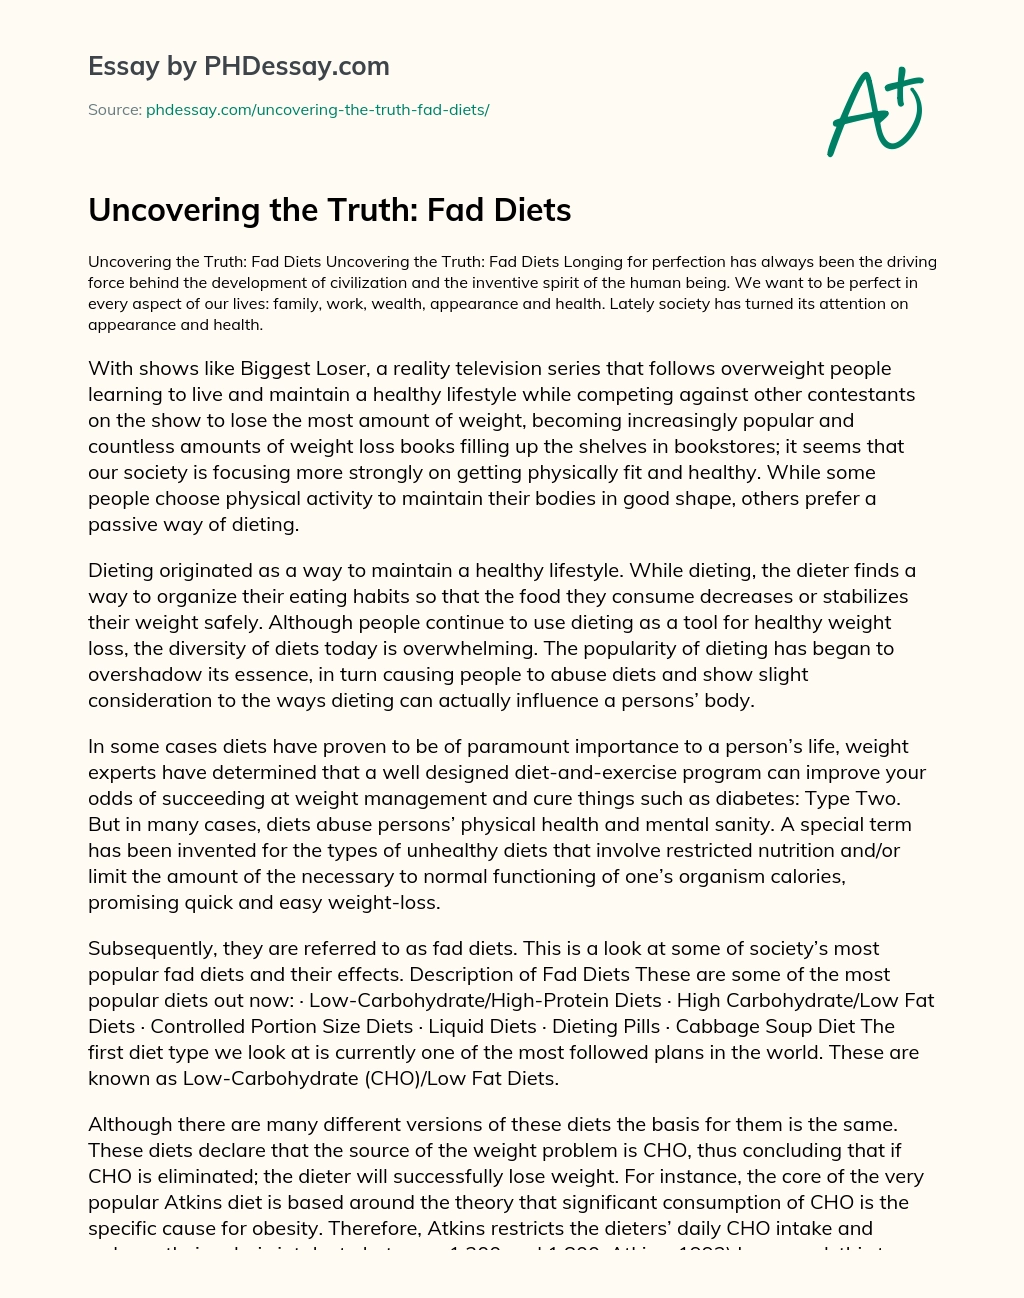 Uncovering the Truth: Fad Diets essay